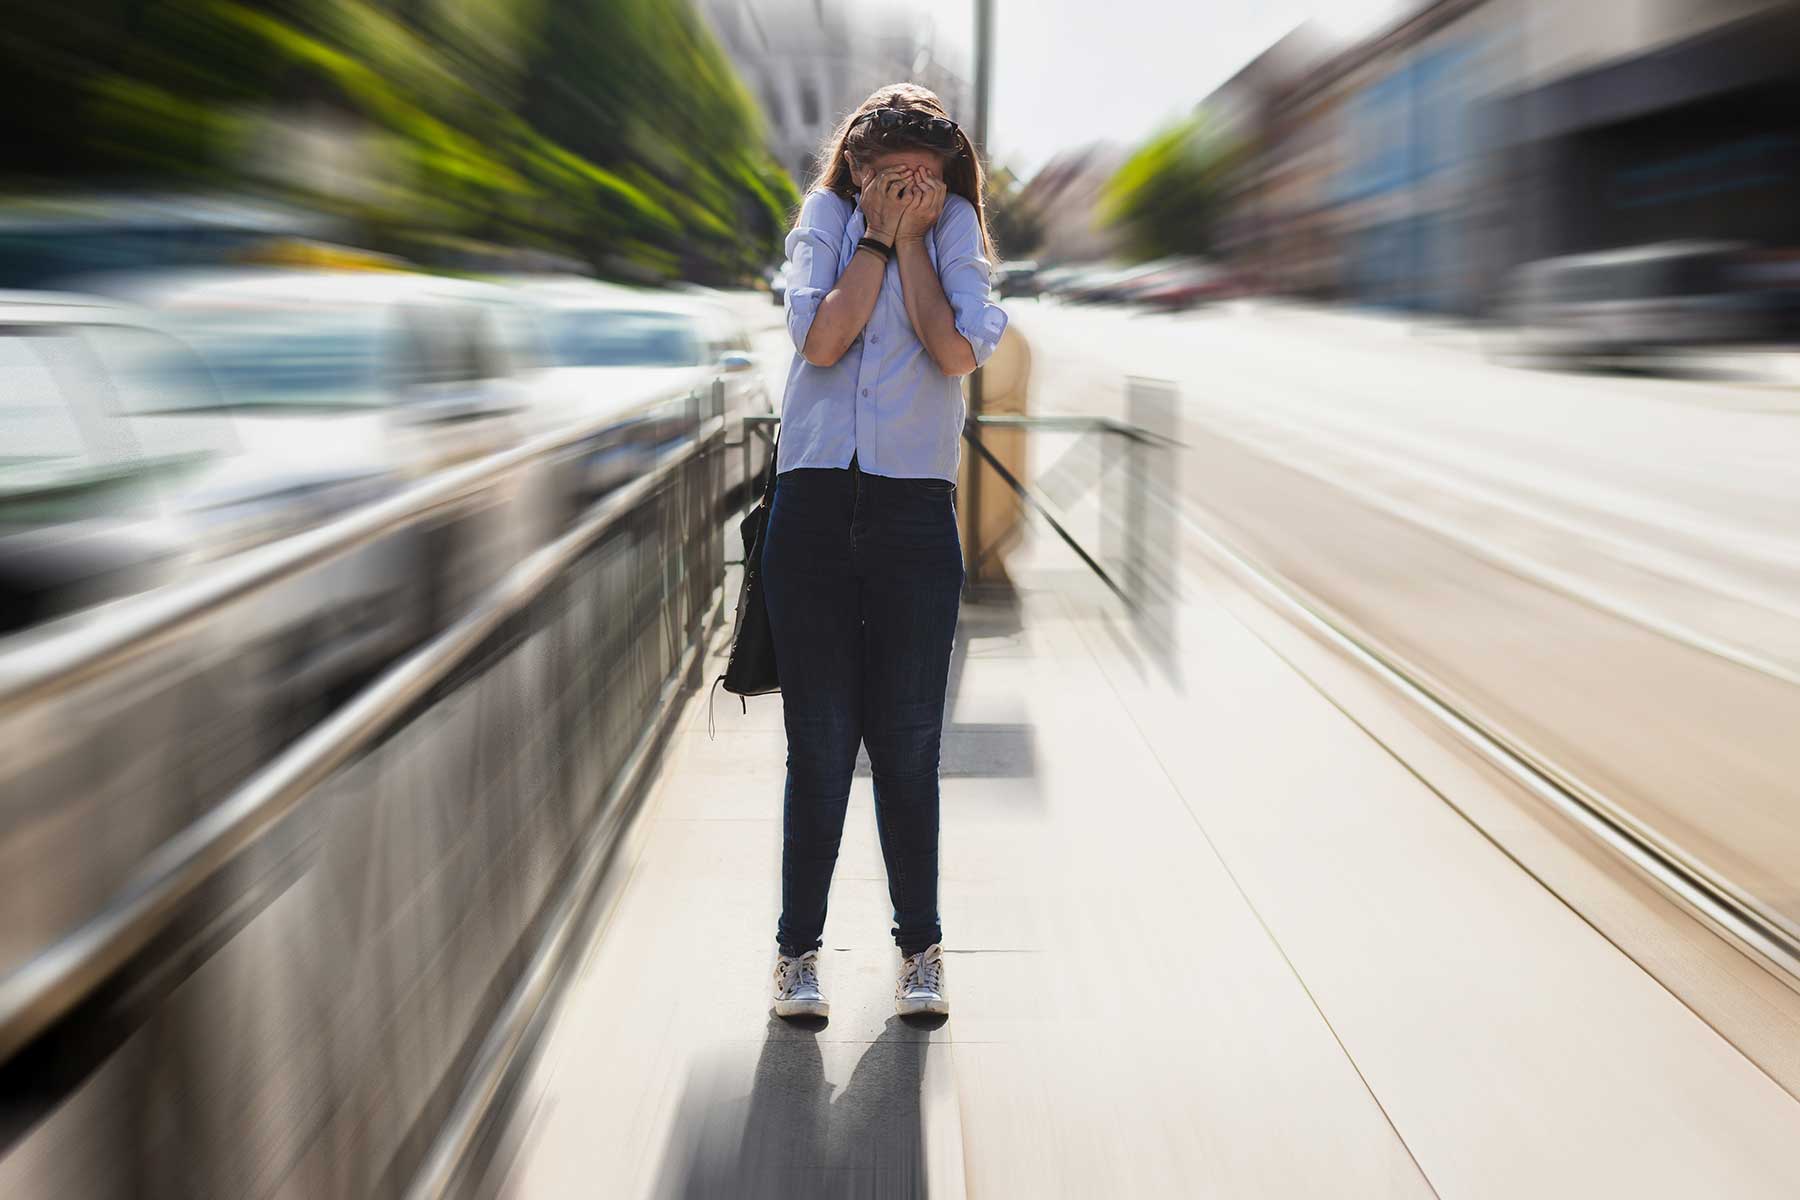 a young woman starts to spiral in an anxiety attack in public on the sidewalk on her way to work